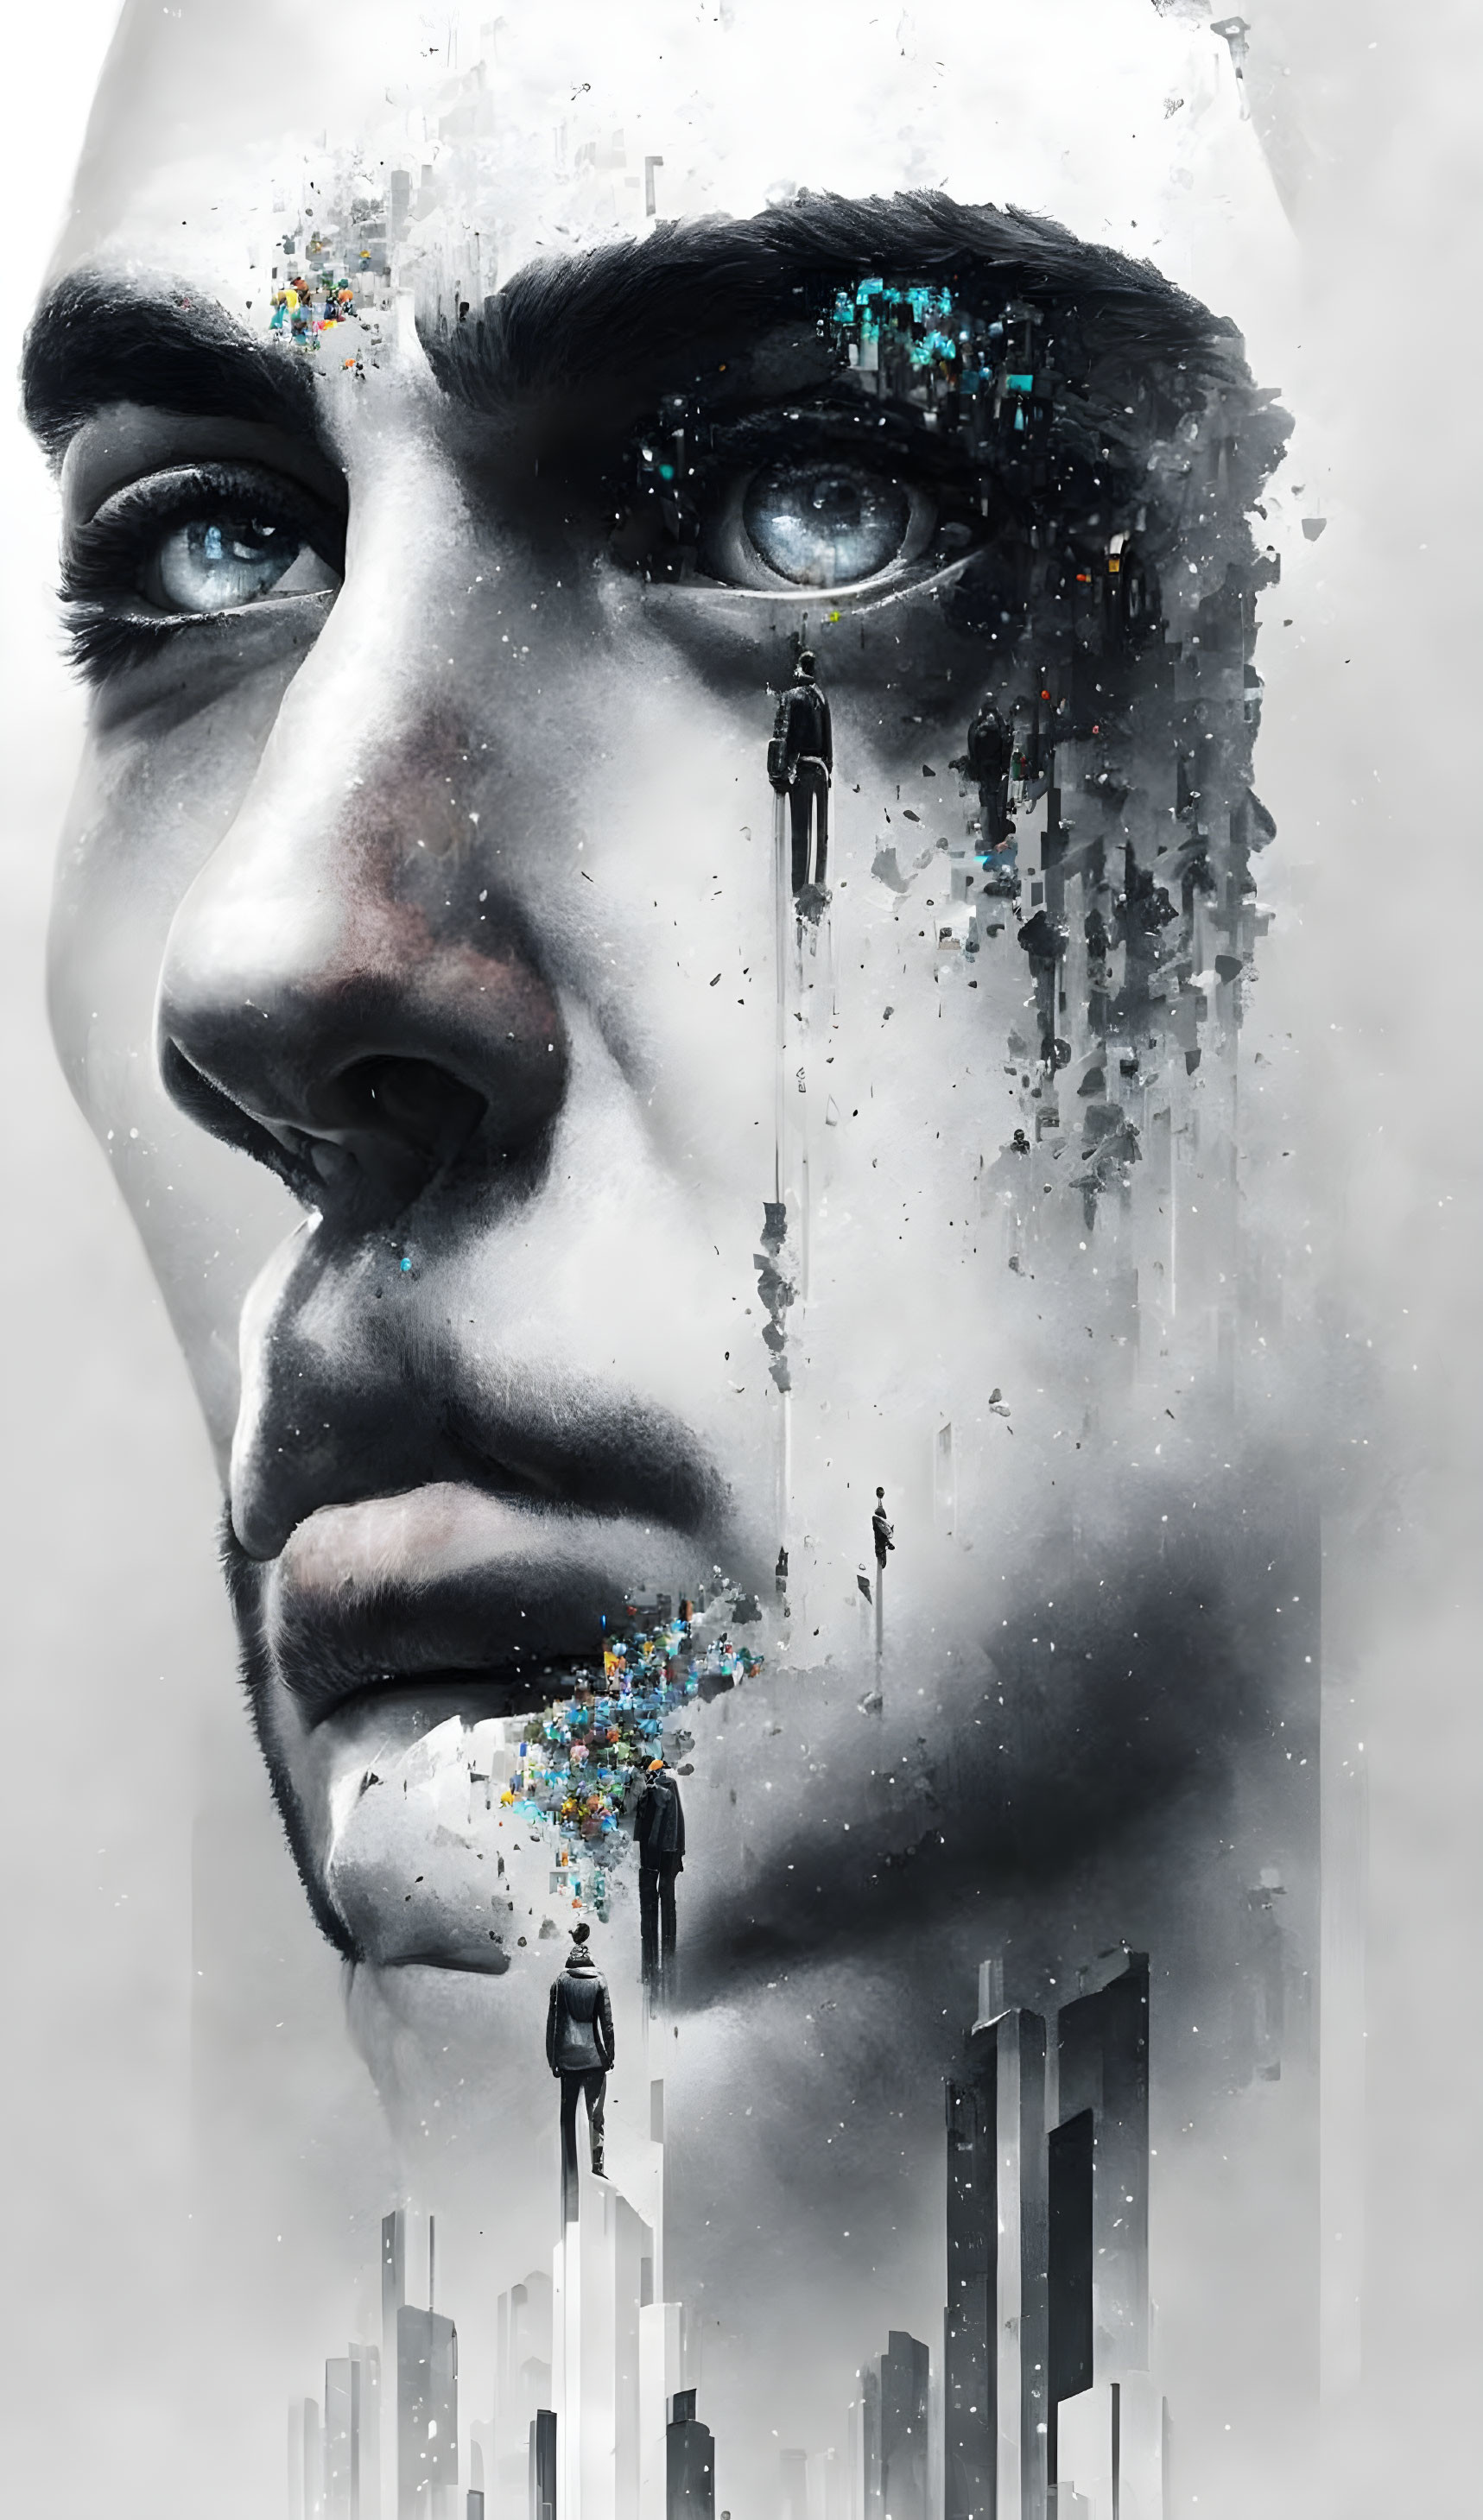 Male face merging into cityscape with tiny figures: A digital artwork.